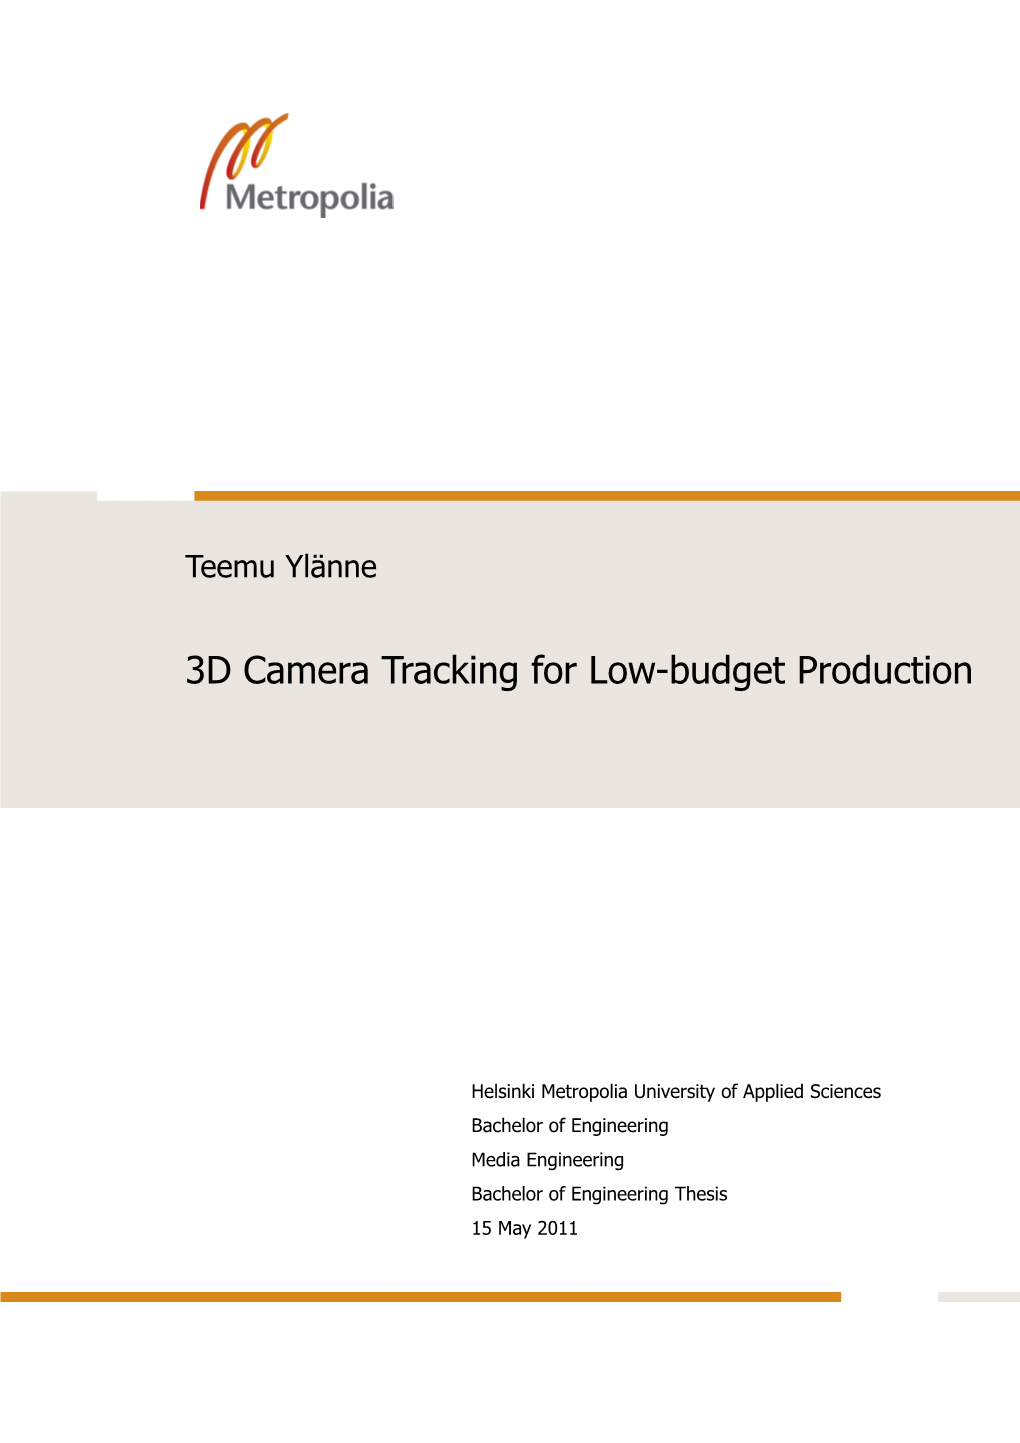 3D Camera Tracking for Low-Budget Production